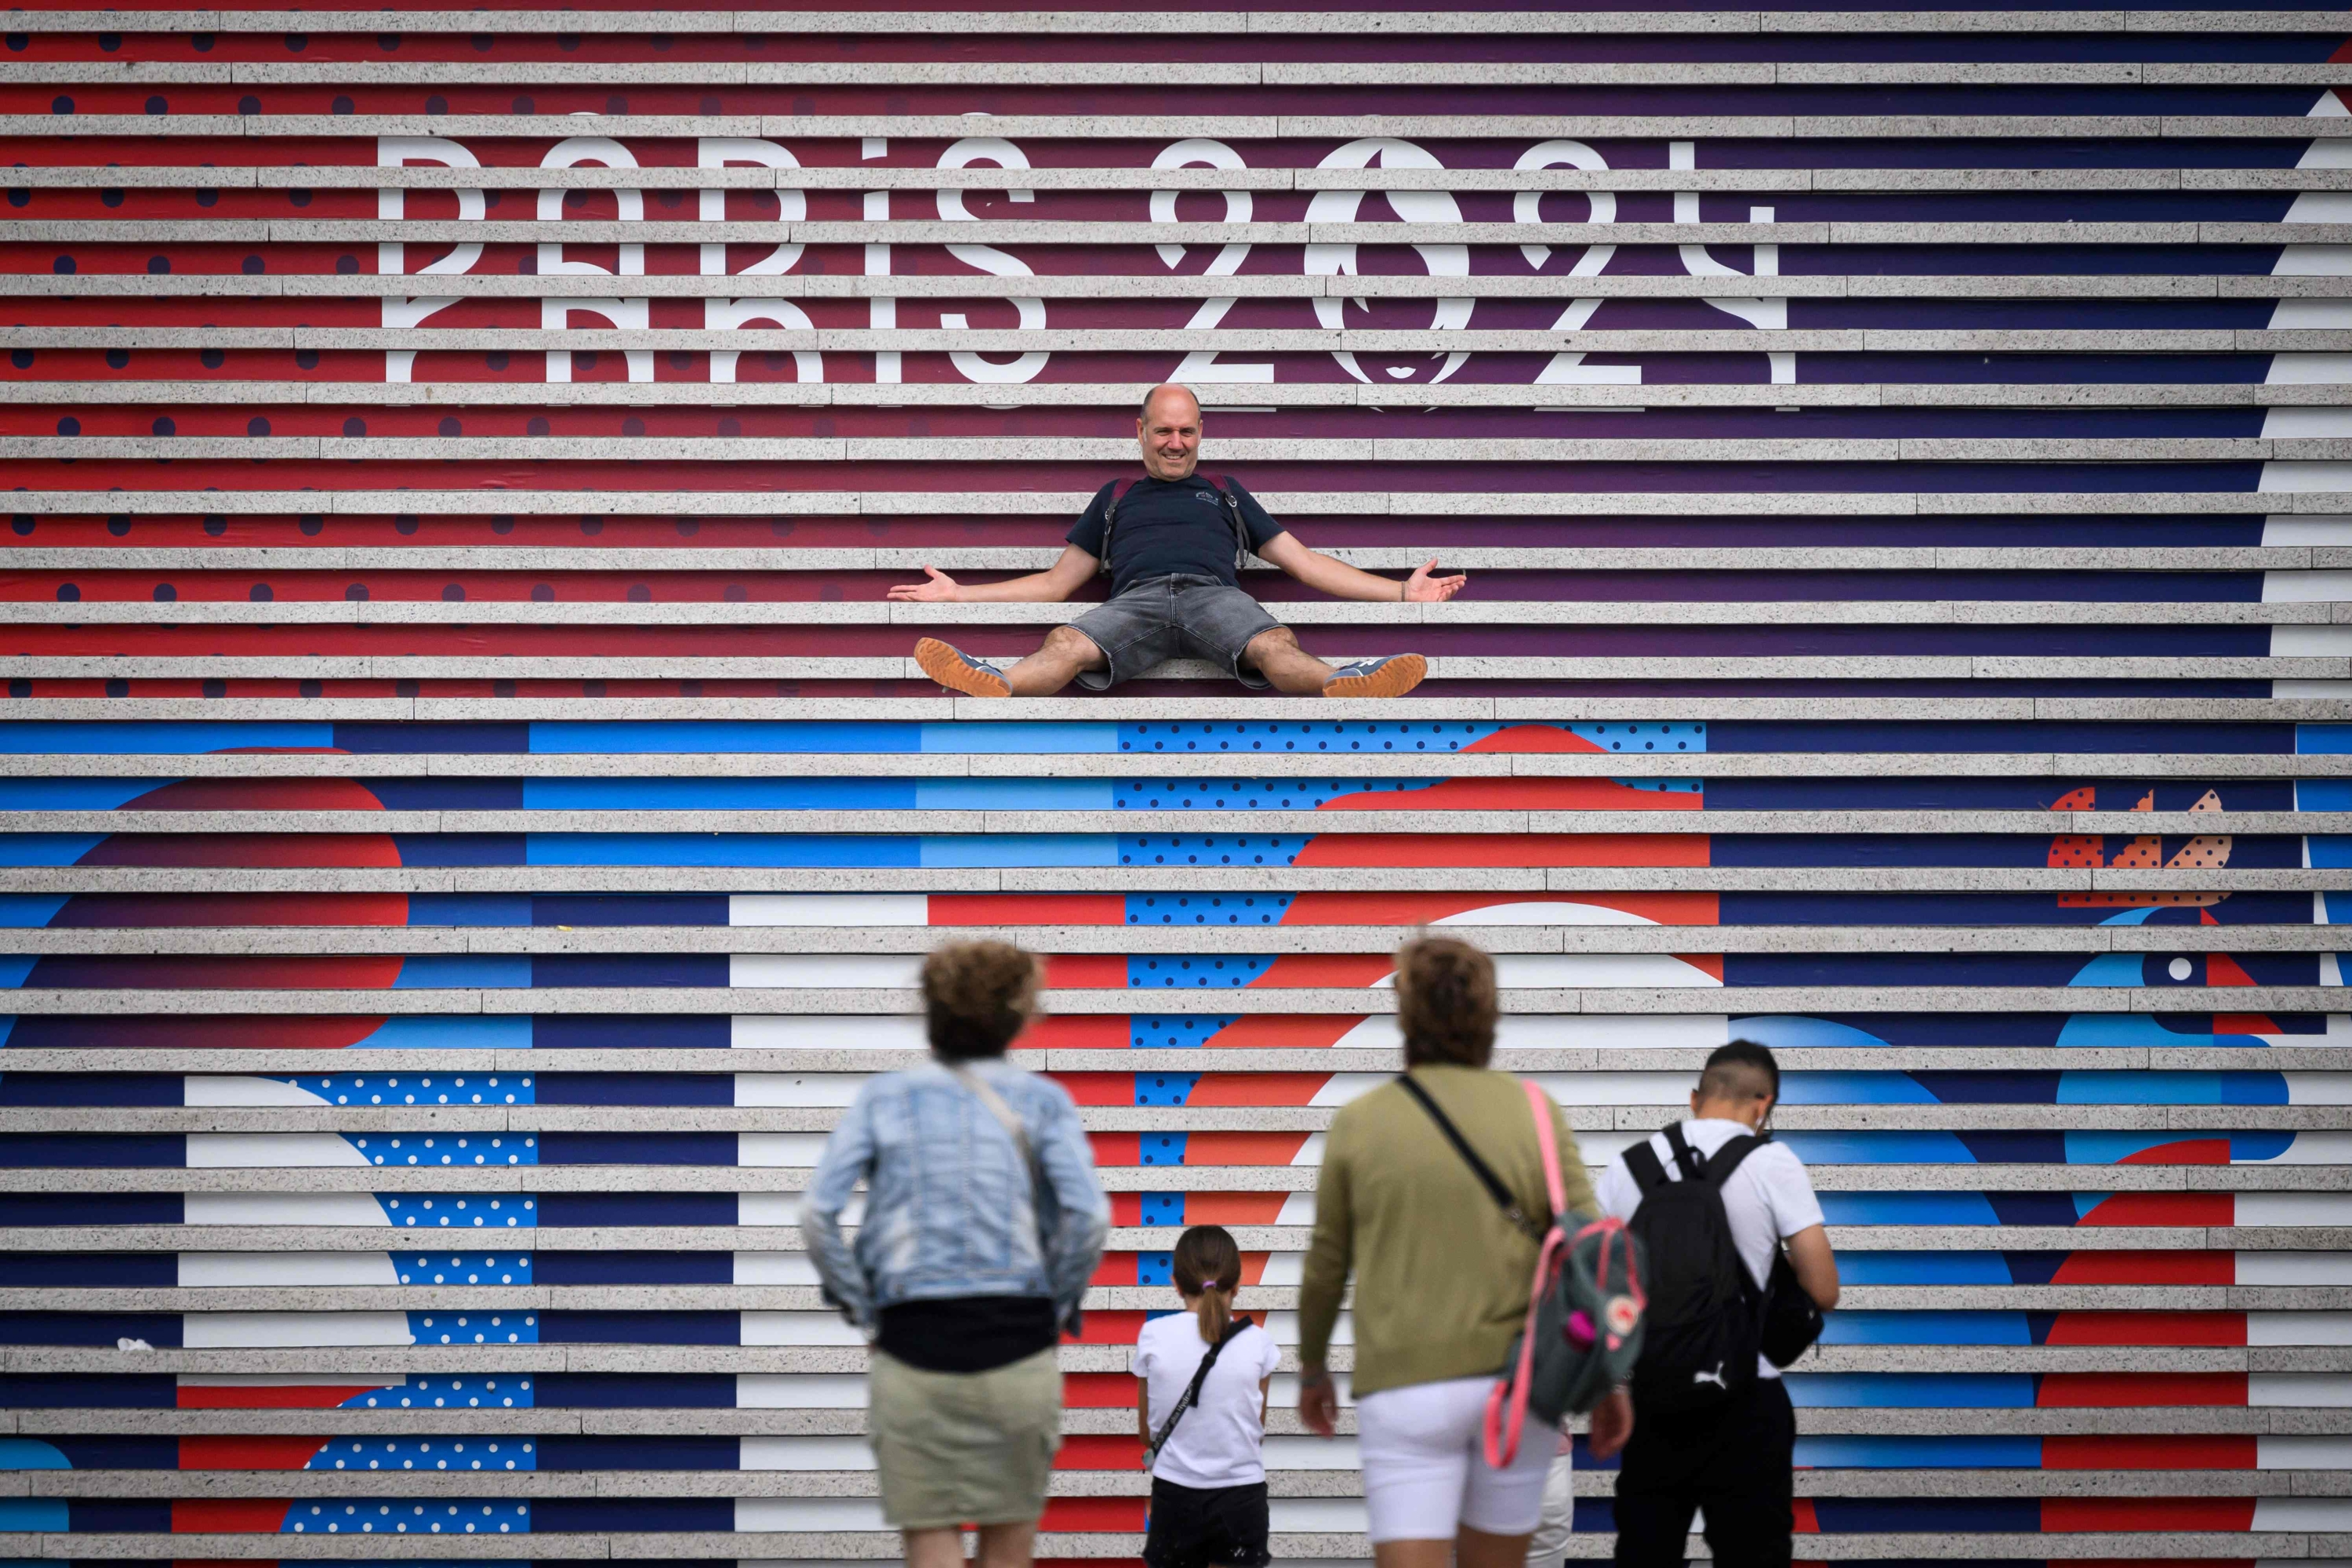 People pose on stairs near the logo of Paris 2024 Olympics Olympic games a few days before the opening ceremony, at La Defense buisiness district, West of Paris, on July 22, 2024. (Photo by Loic VENANCE / AFP)